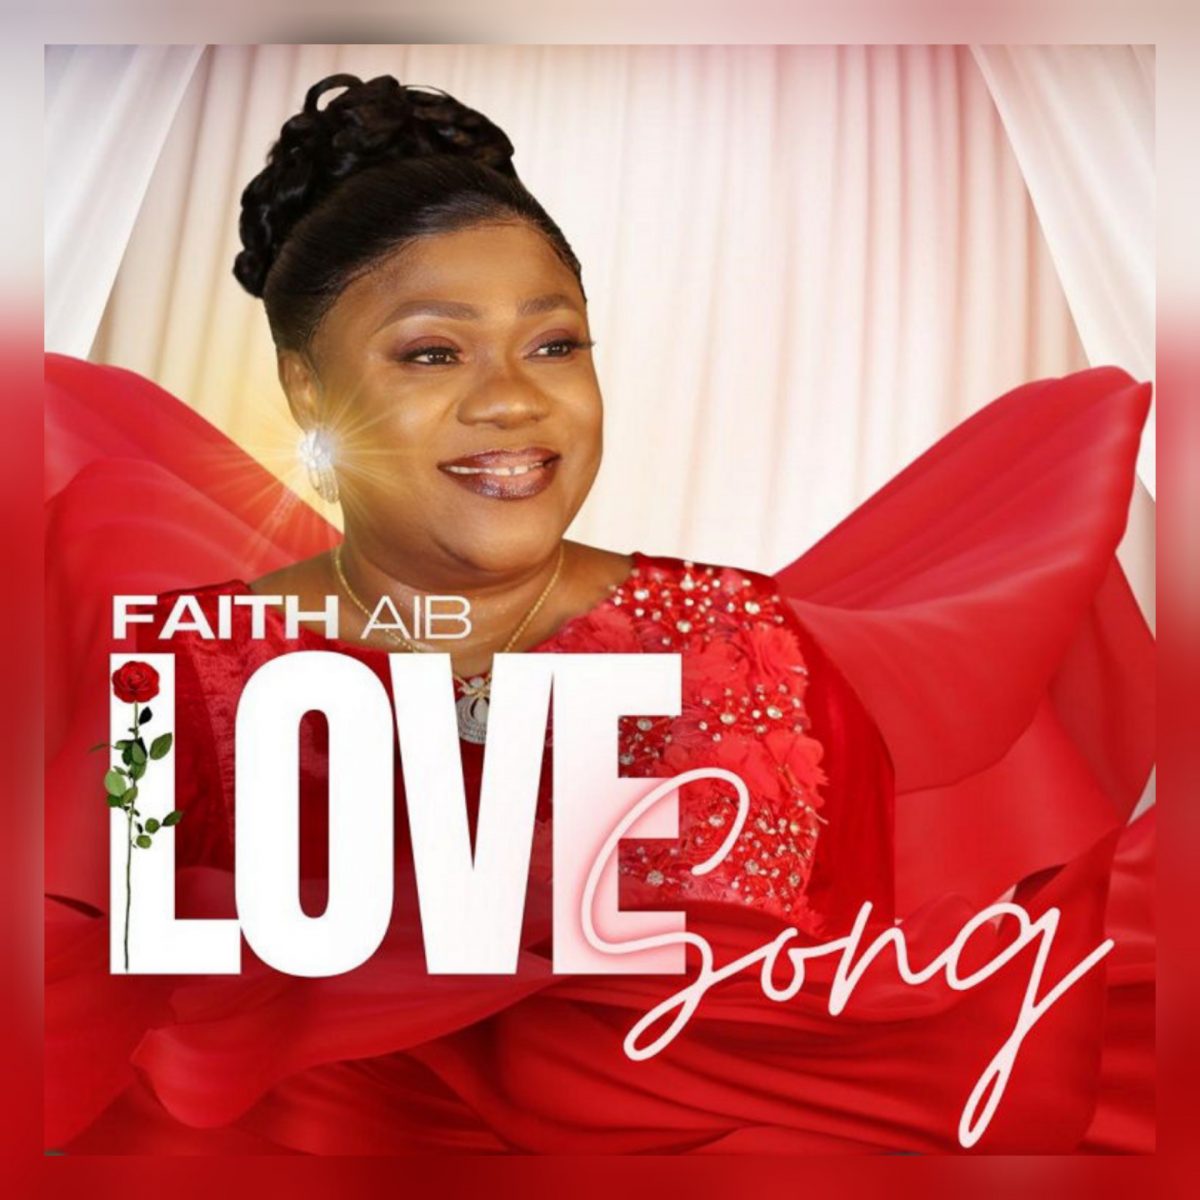 Lovesong By Faith Aib Ft. Uncharted